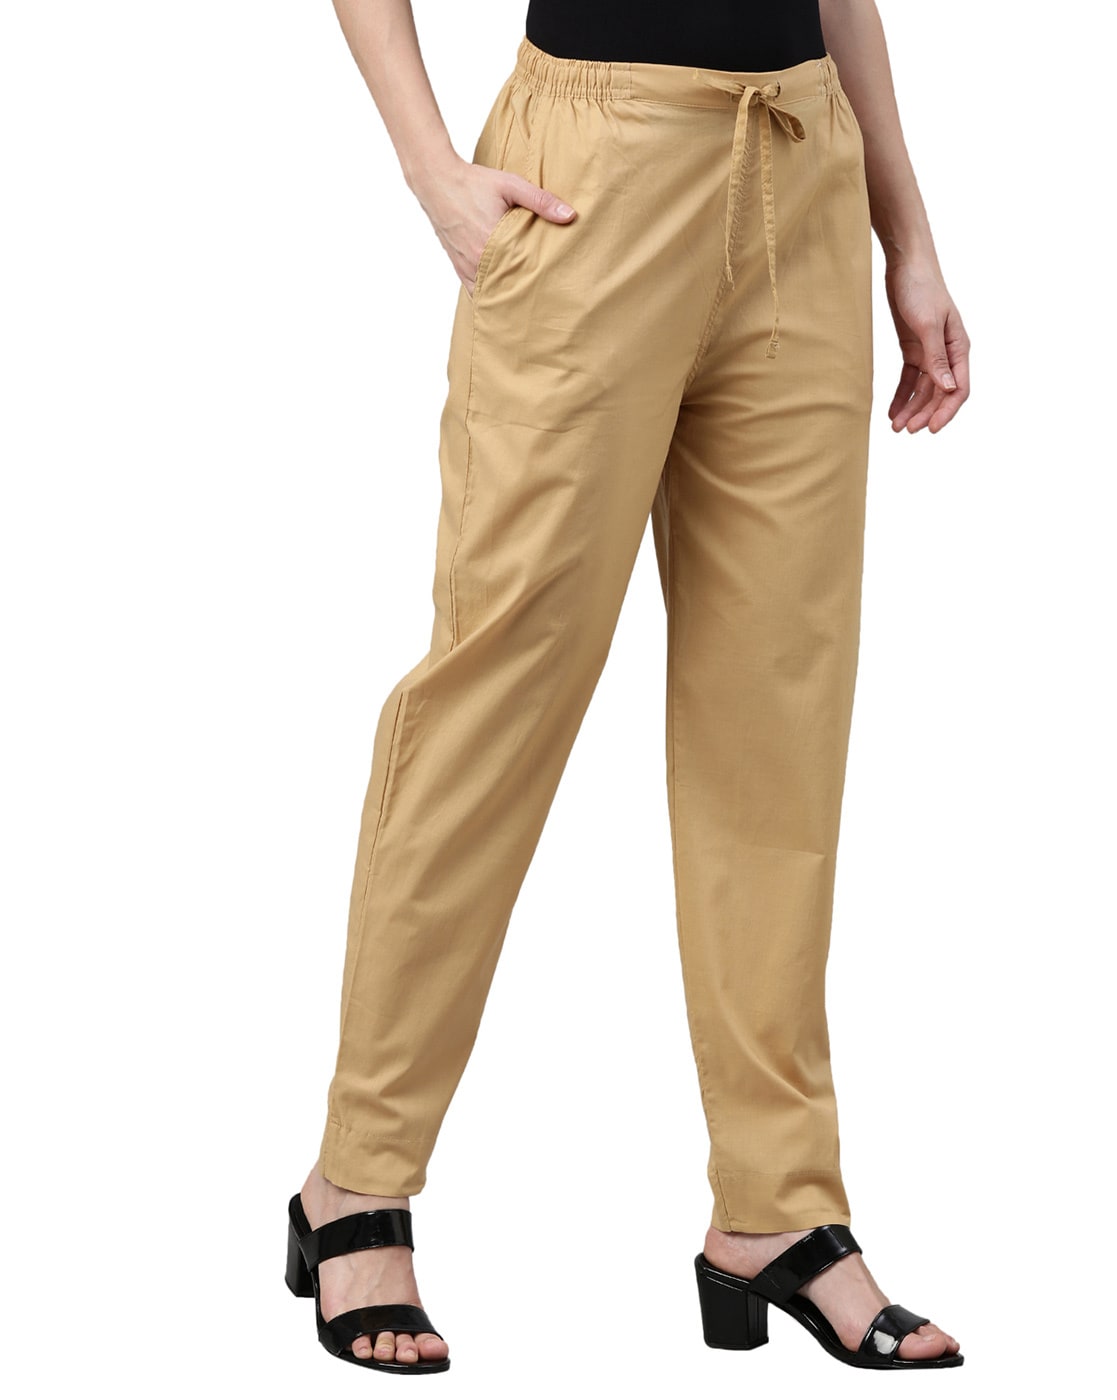 Go Colors Light Beige Cotton Pants LX Buy Go Colors Light Beige Cotton  Pants LX Online at Best Price in India  Nykaa